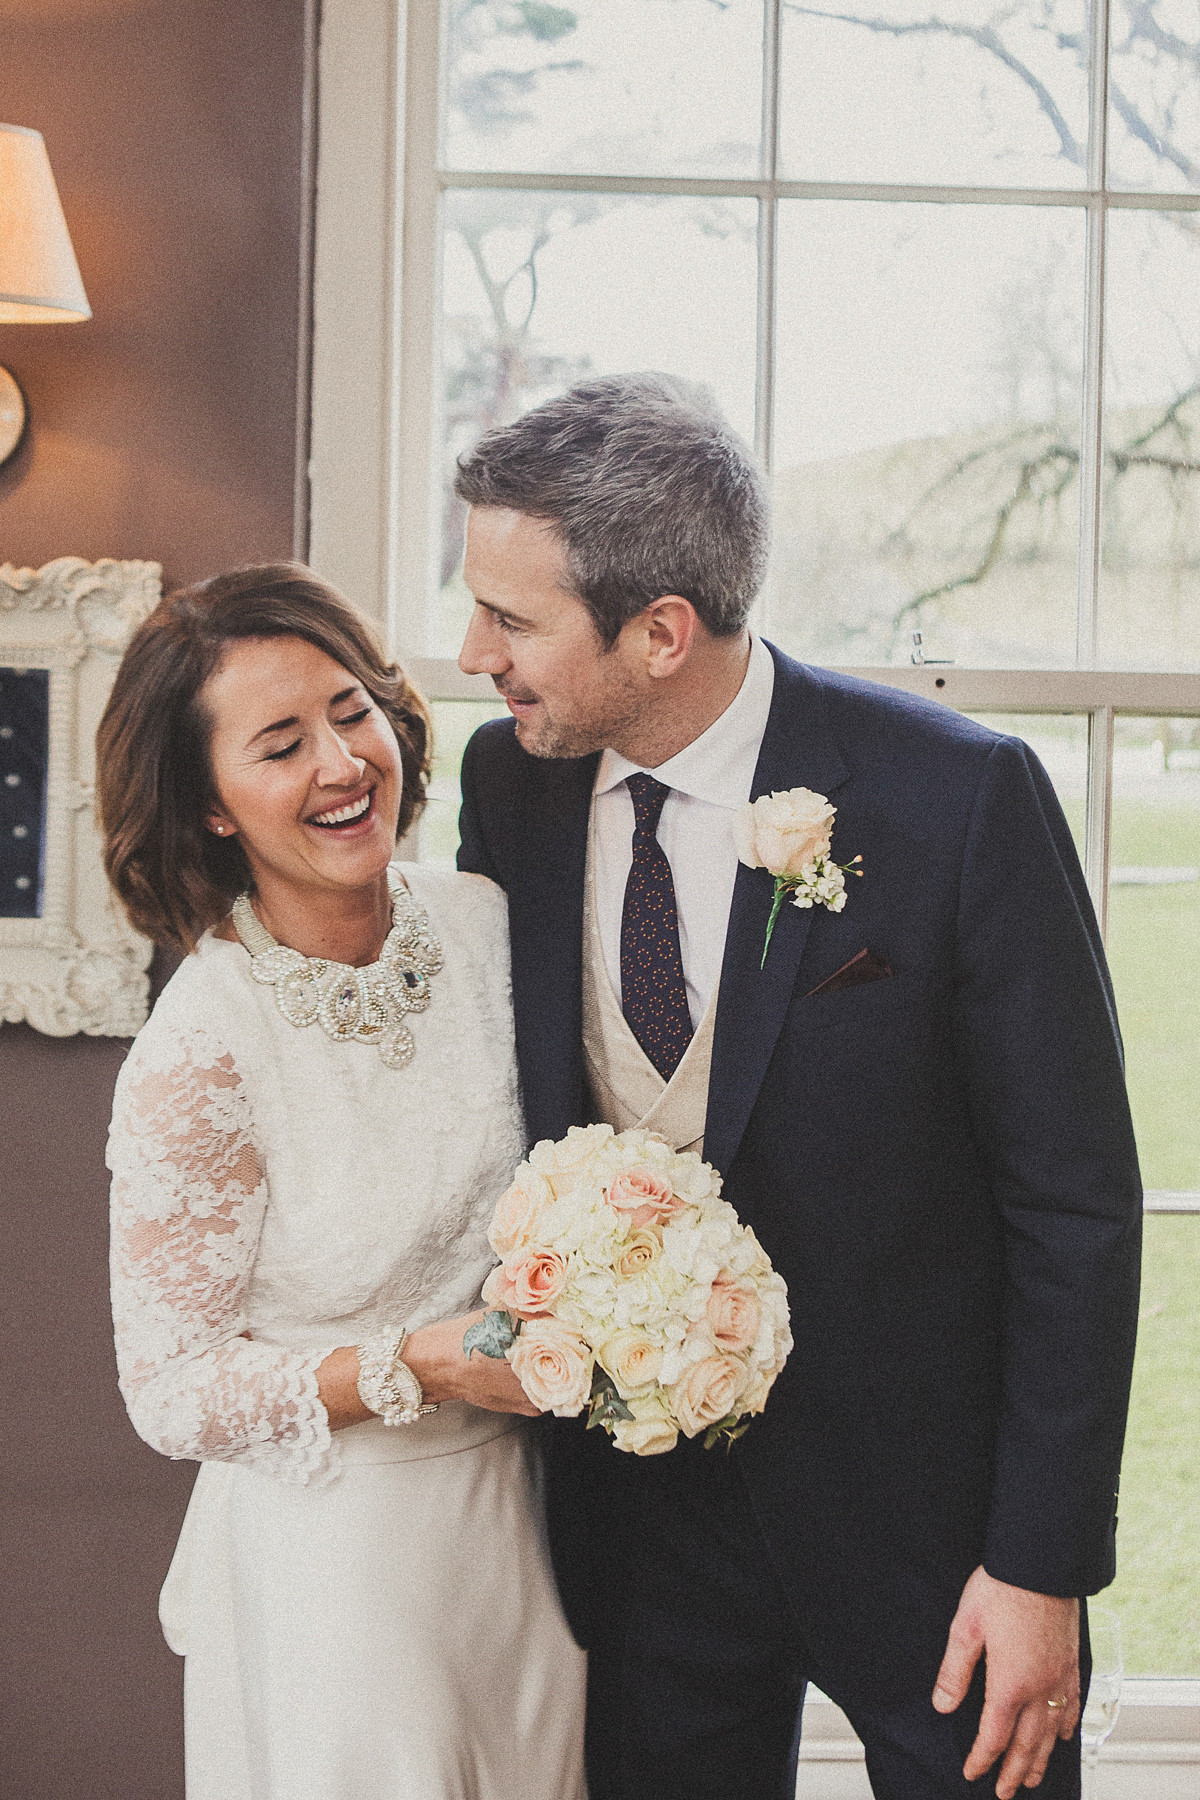 Ruth wore a Charlie Brear gown for her Spring wedding at Yorebridge House in Bainbridge, Yorkshire.